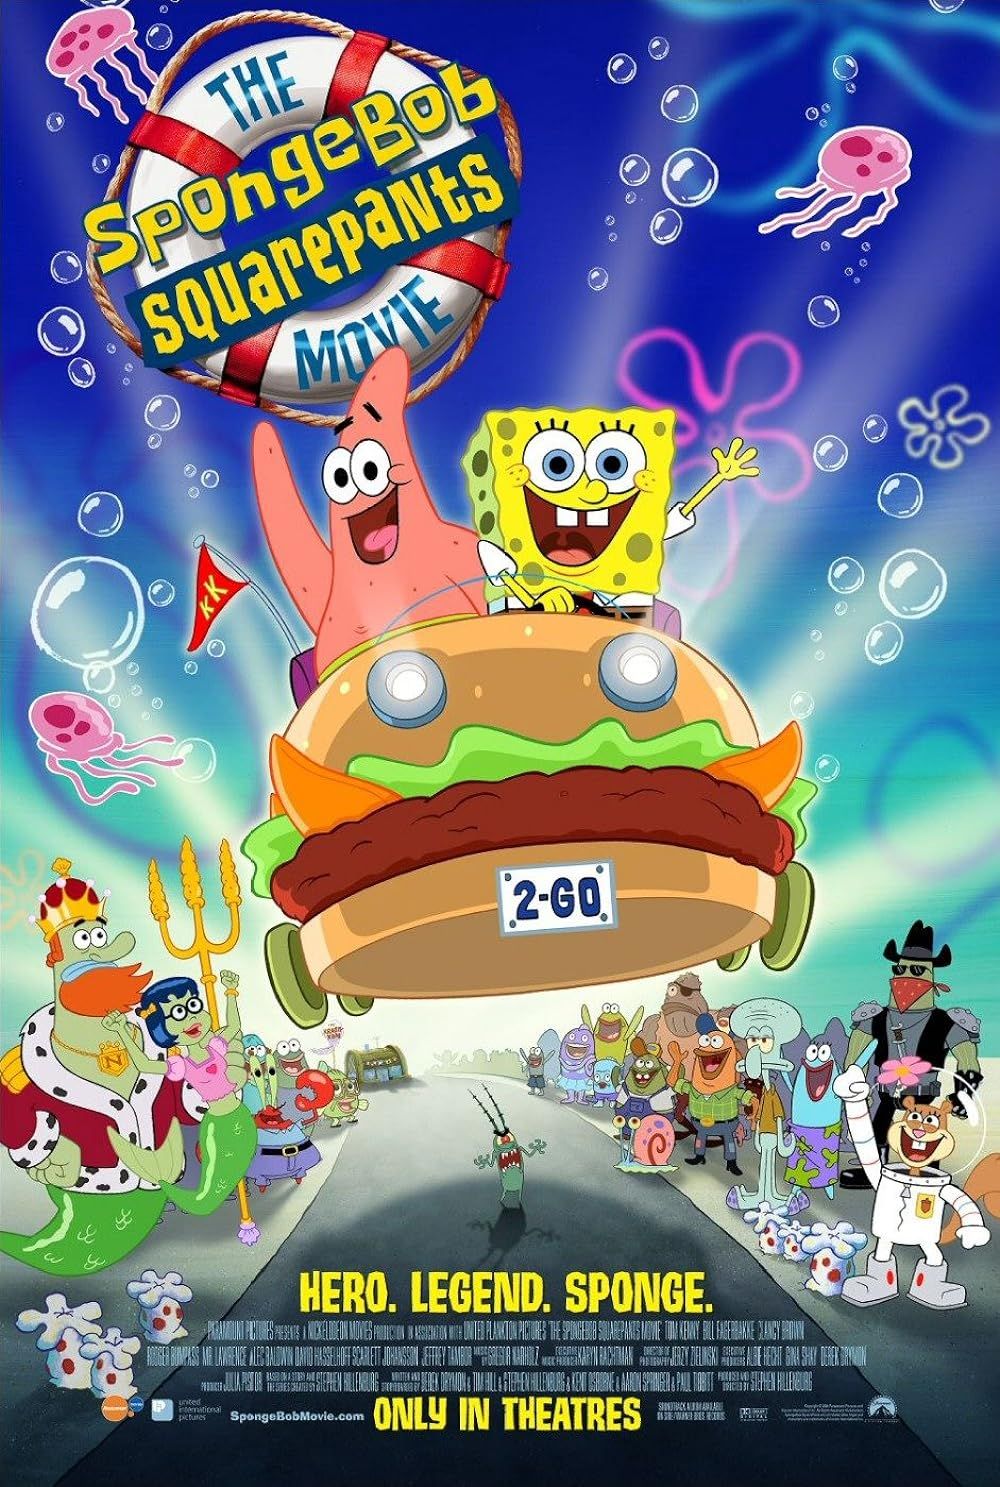 Patrick and SpongeBob ride in a car as the rest of the cast watches in The SpongeBob Squarepants Movie Poster